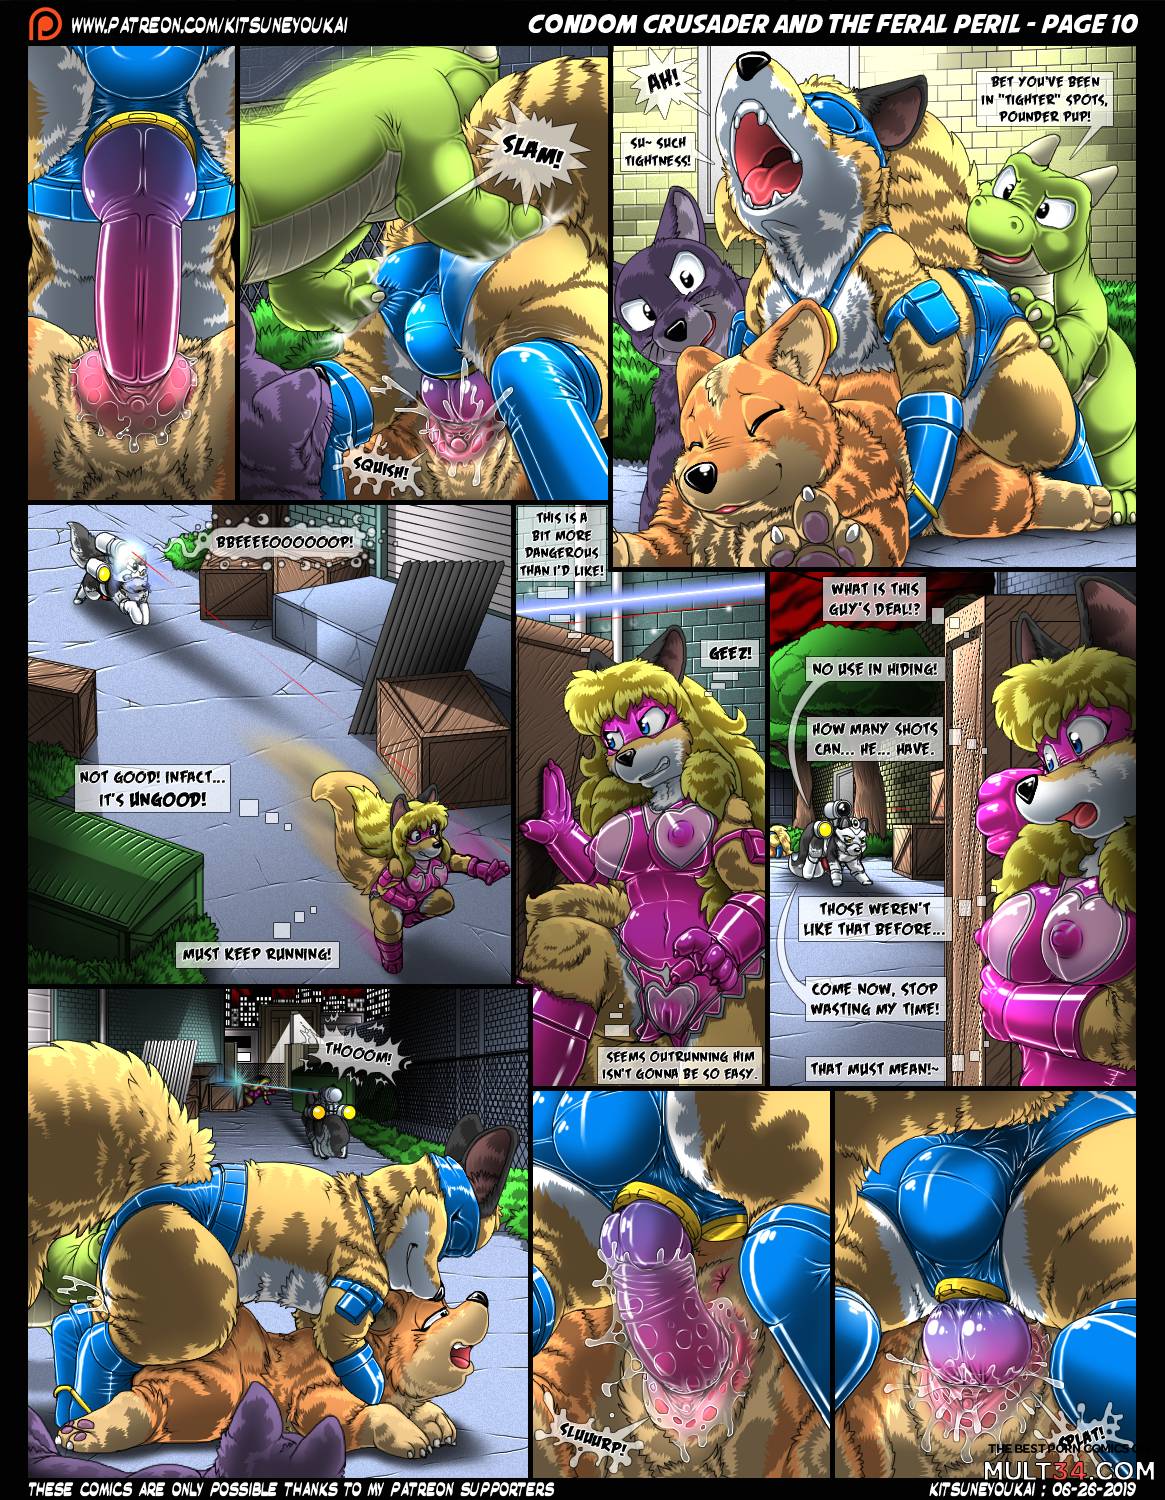 Condom Crusader and the Feral Peril page 10